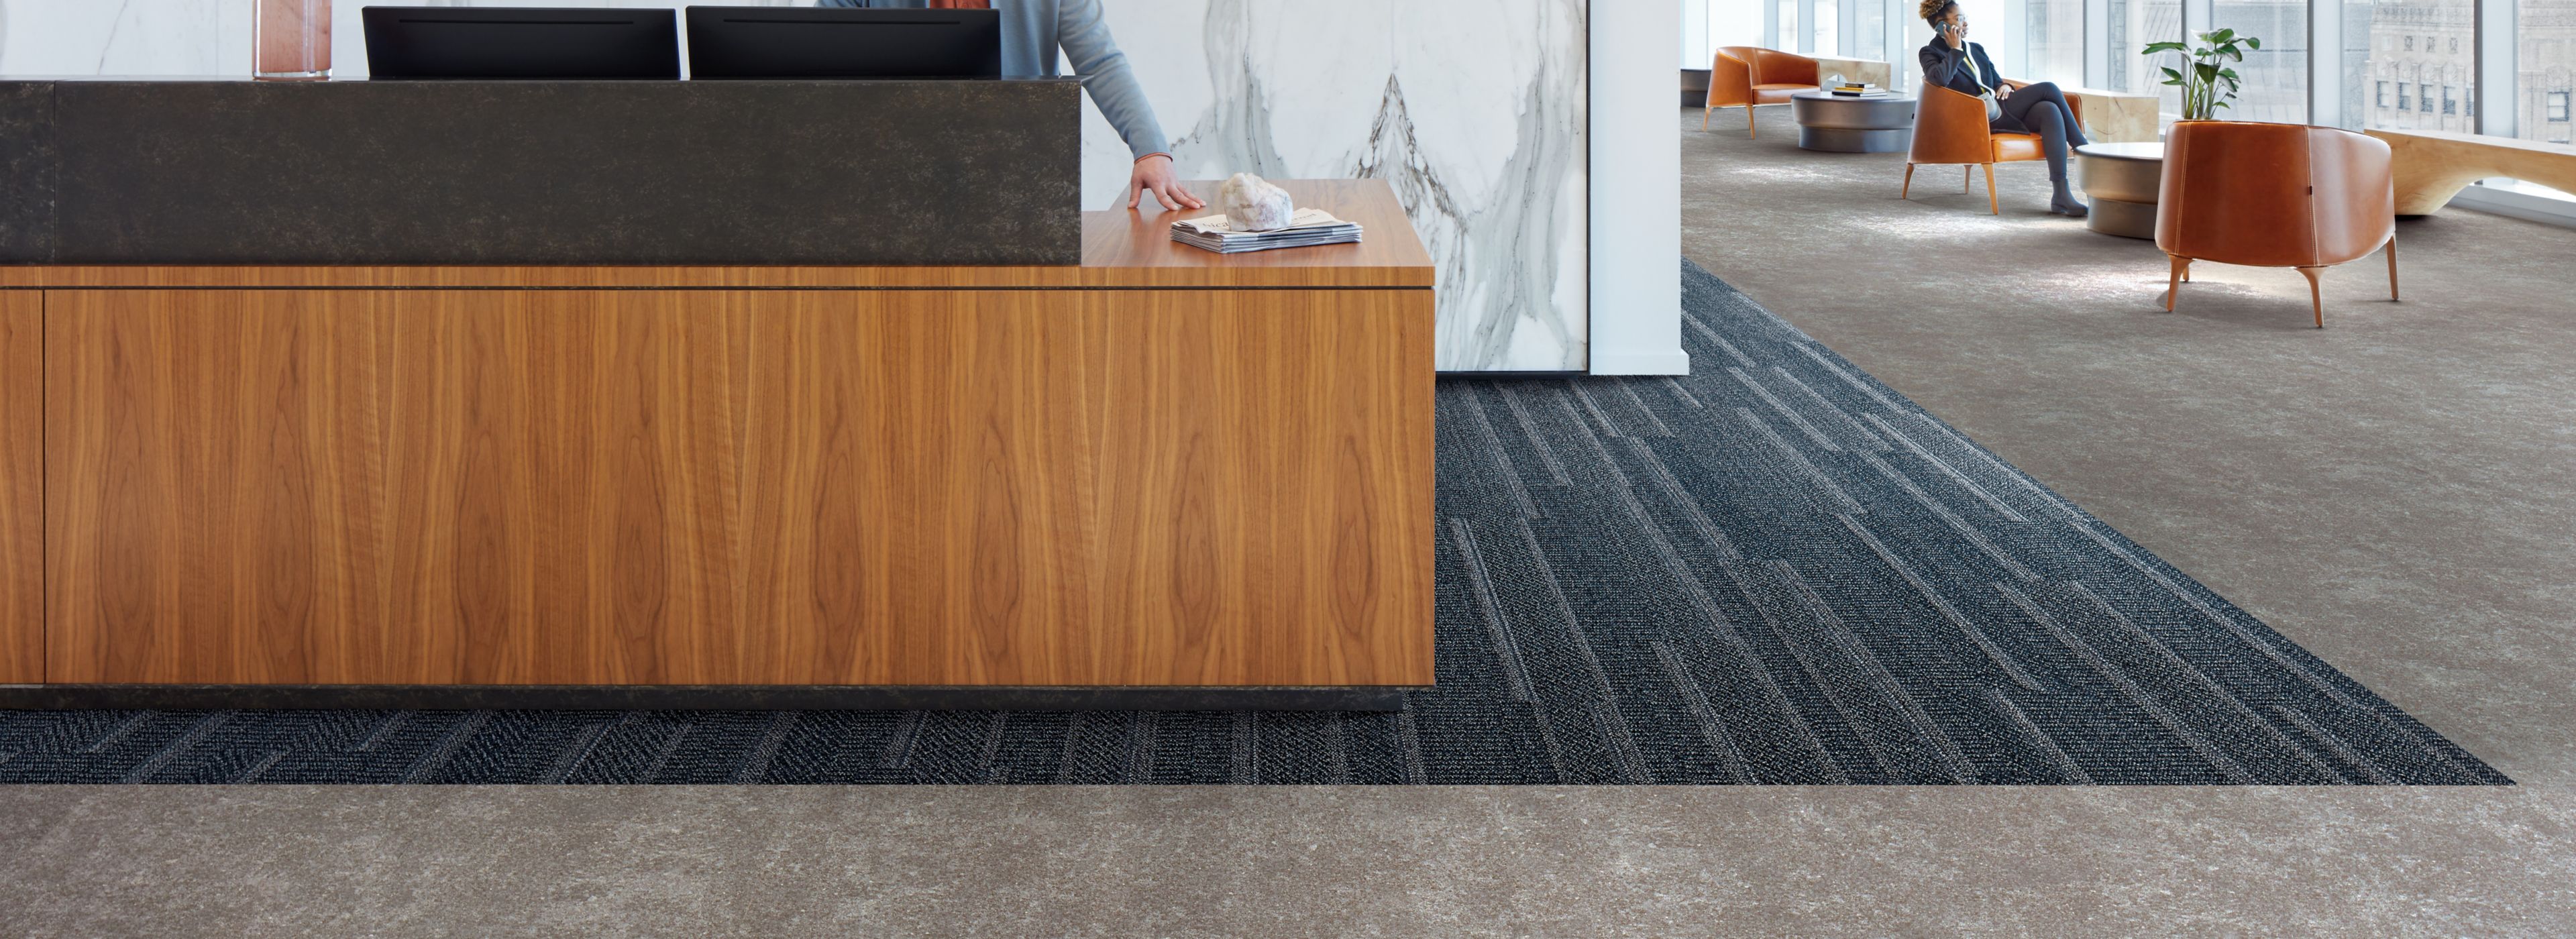 Interface Simple Sash plank carpet tile and Walk of Life LVT in a corporate lobby area with front desk  imagen número 1